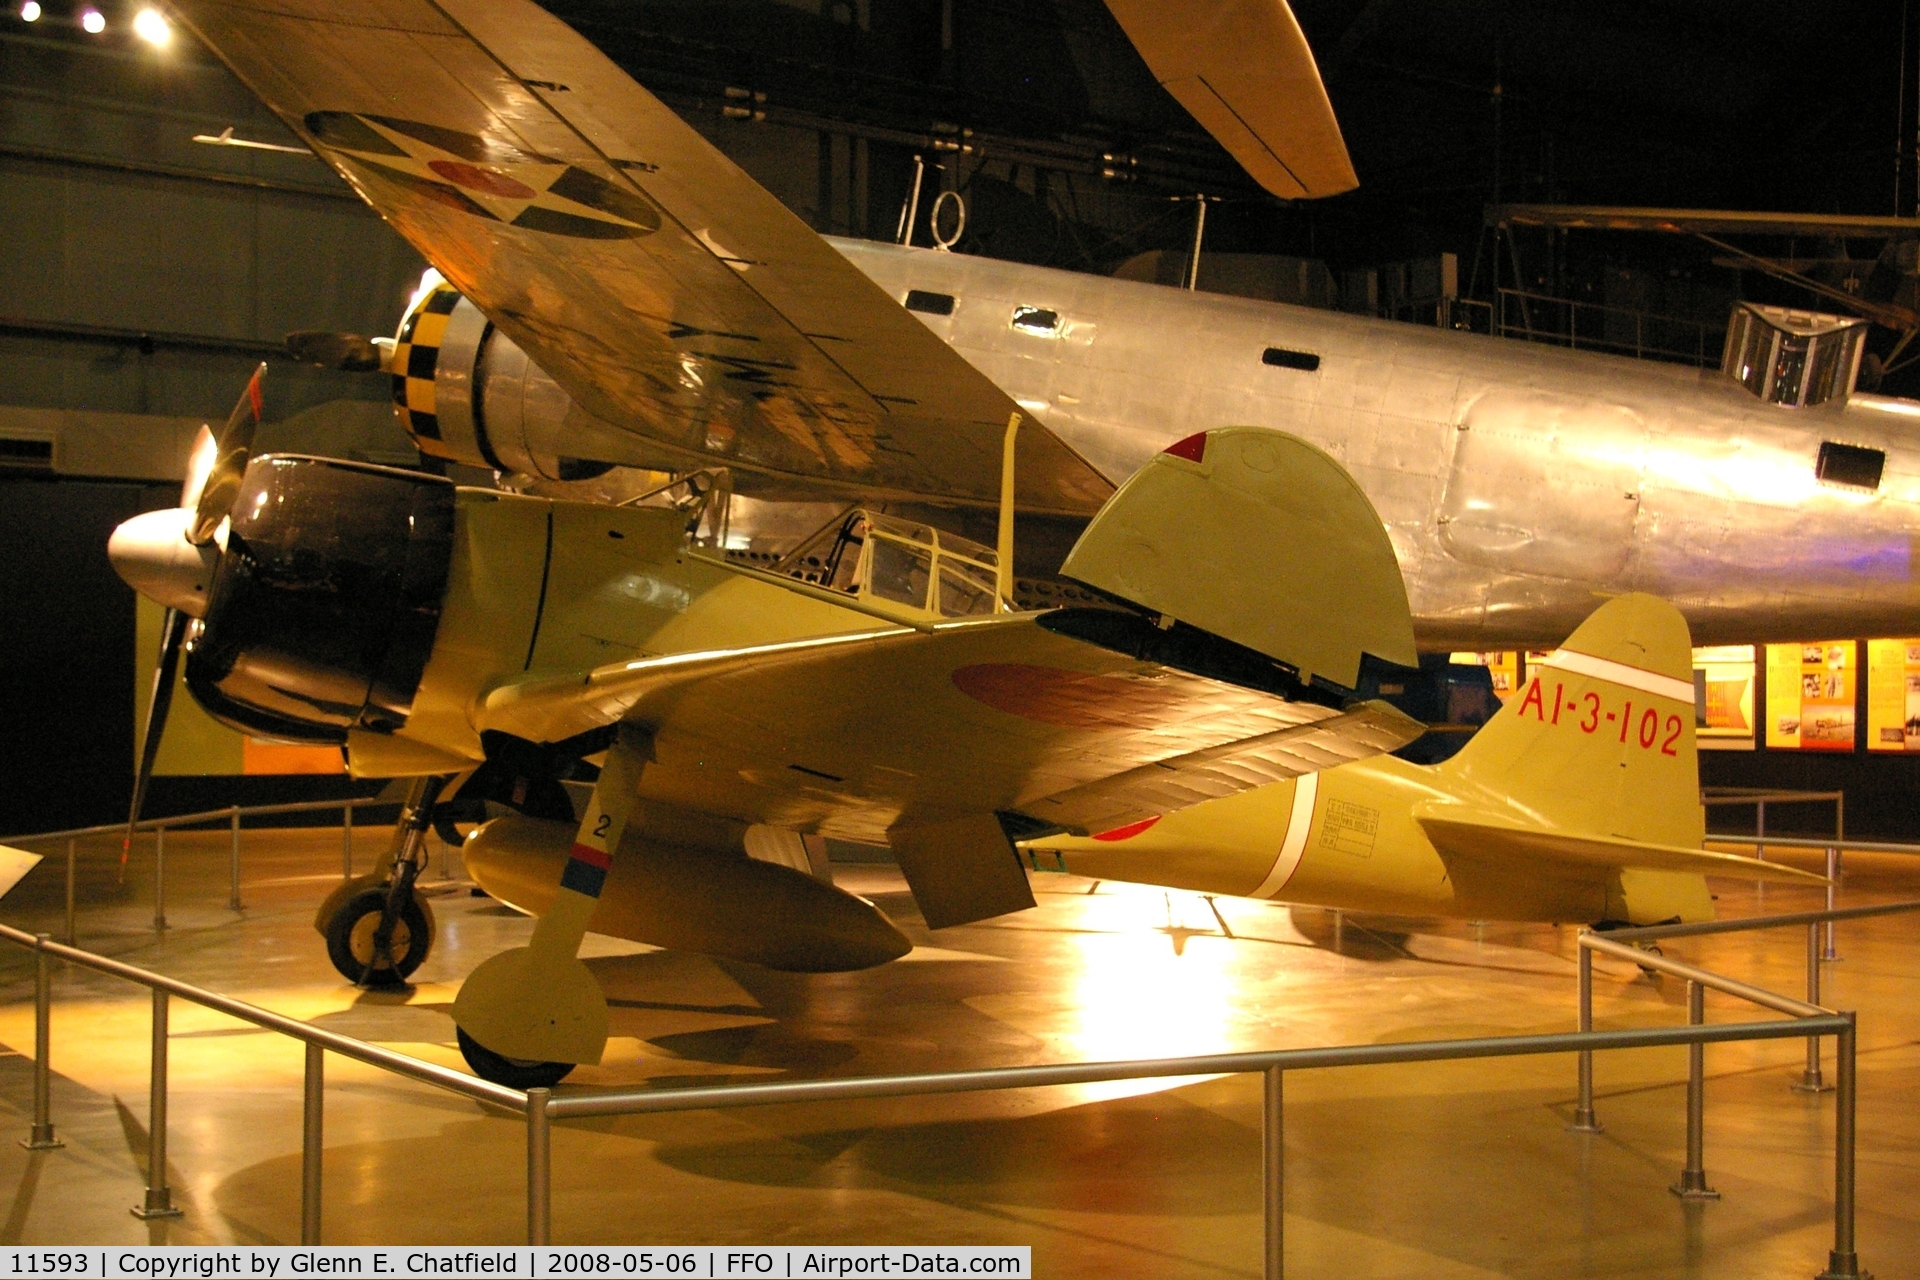 11593, Mitsubishi A6M2 Zero C/N 51553, Displayed at the National Museum of the U.S. Air Force